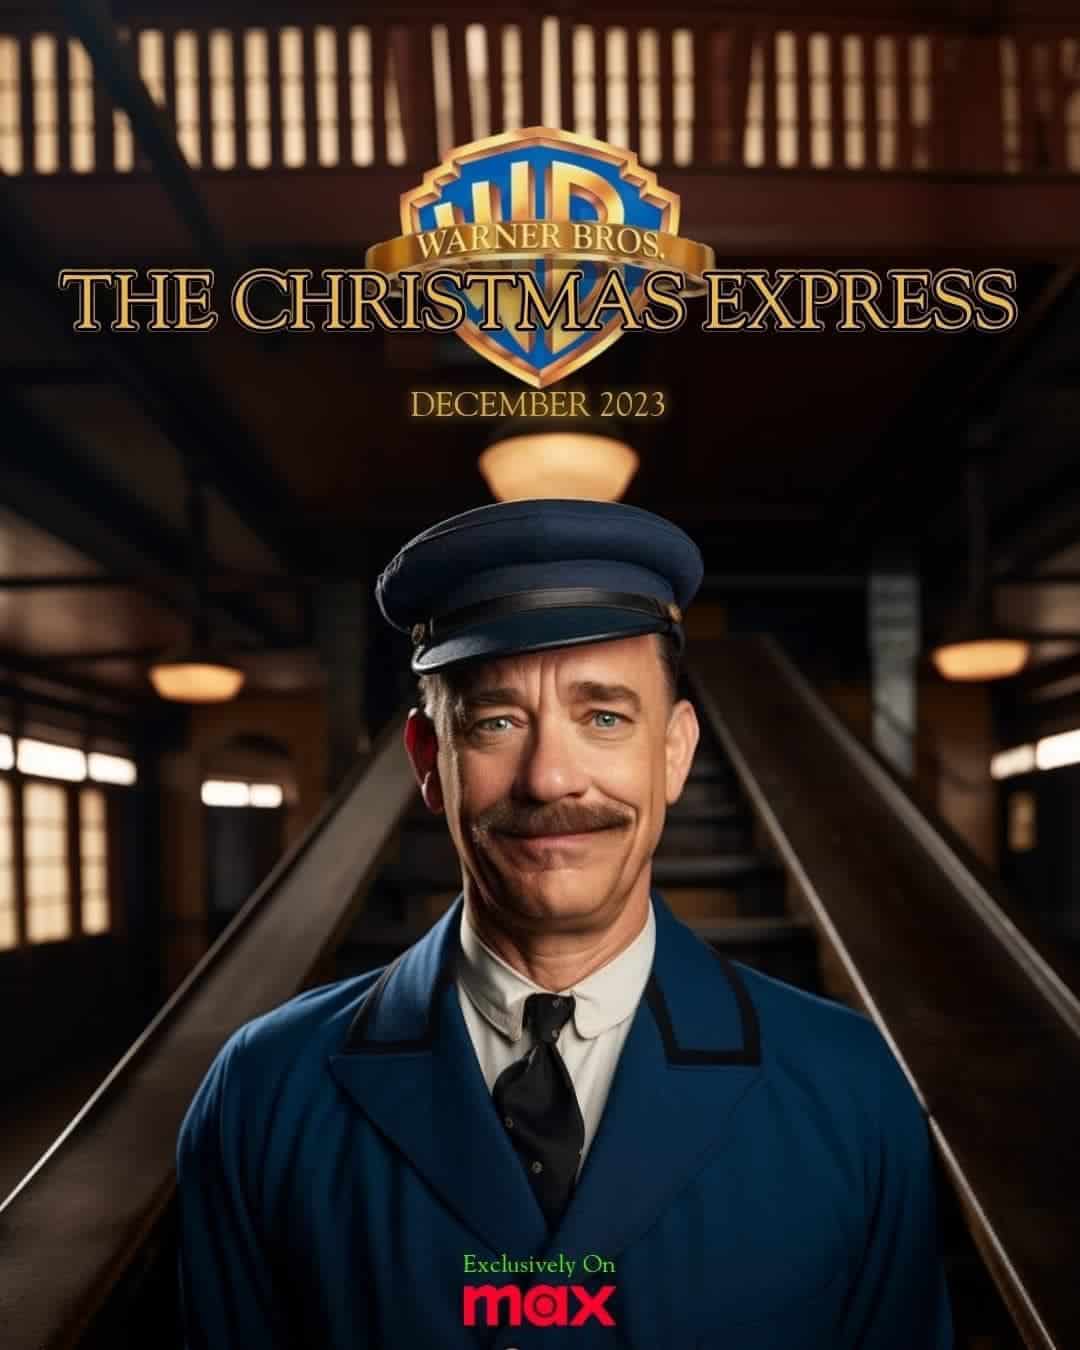 All Aboard the Hype Train The Christmas Express A Polar Express Prequel Starring Tom Hanks